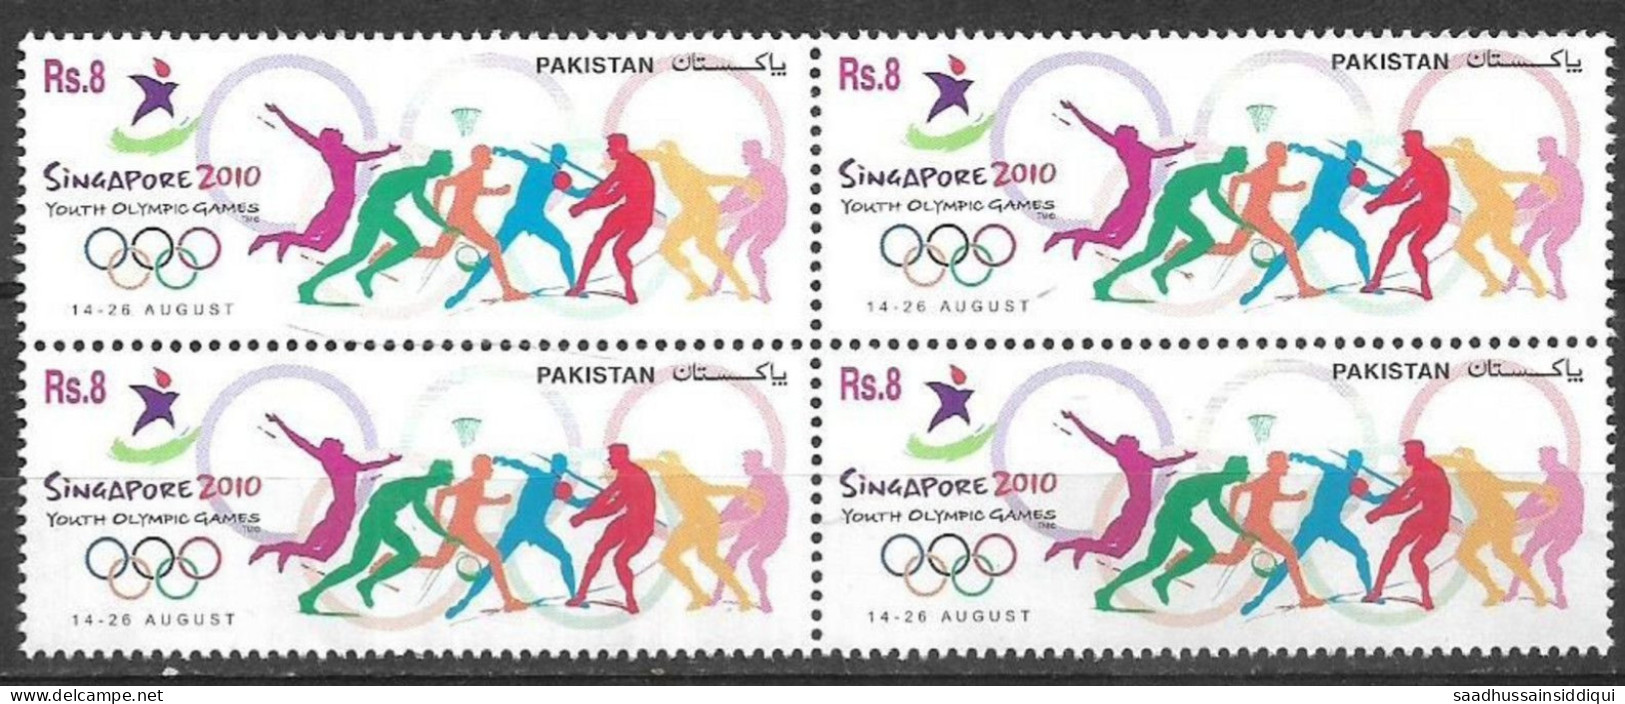 PAKISTAN 2010 STAMPS YOUTH OLYMPIC GAMES SINGAPORE BLOCK OF FOUR MNH - Pakistan